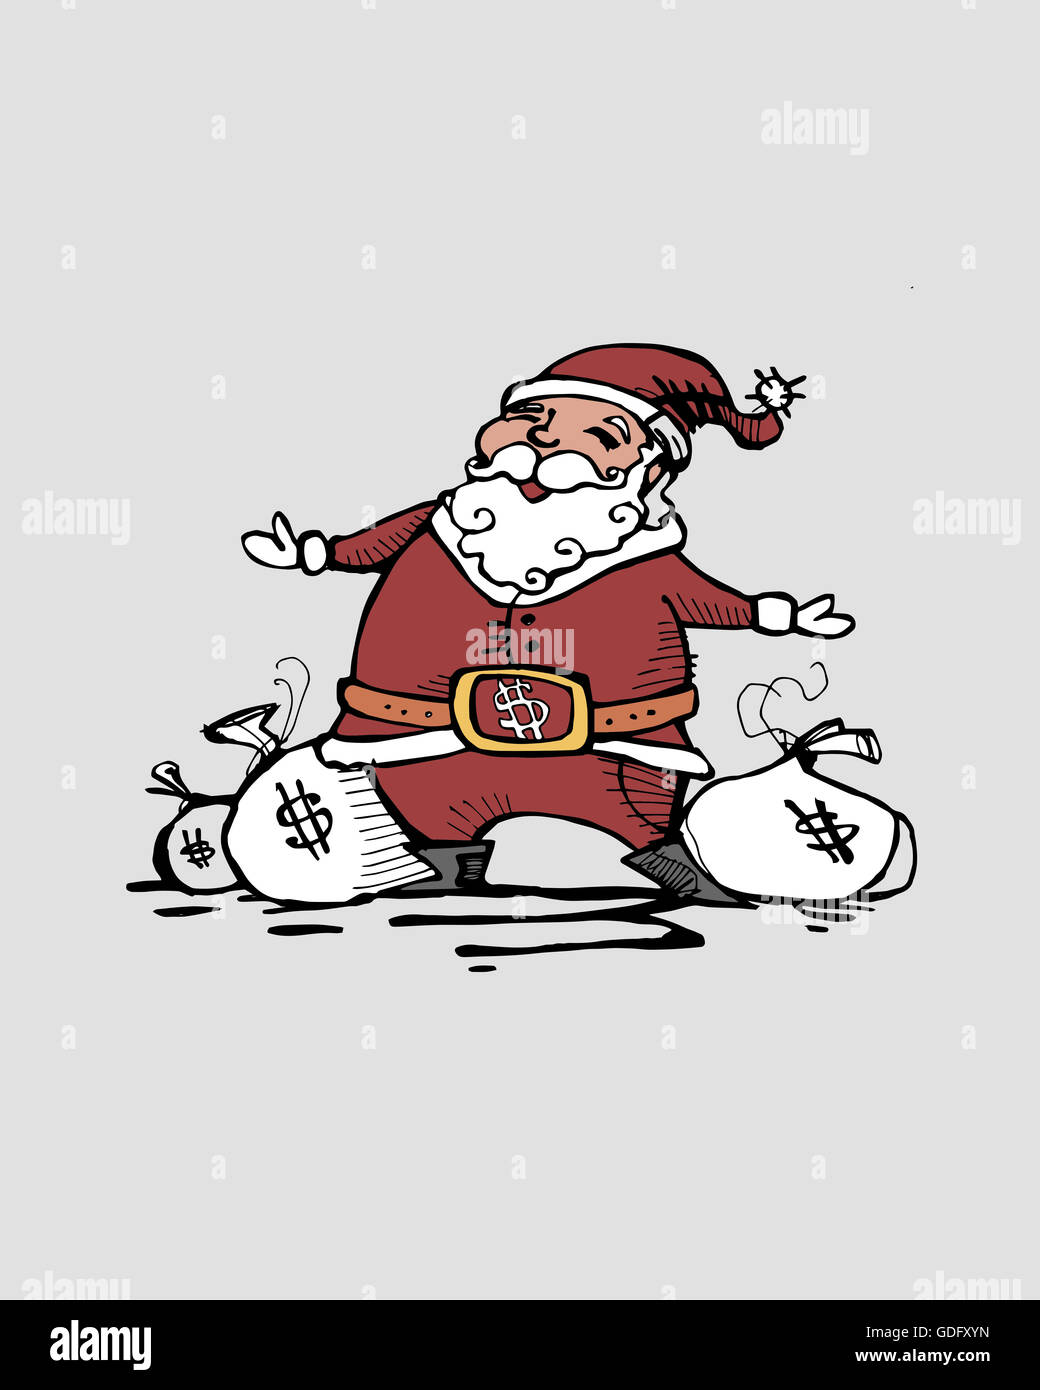 Hand drawn illustration or drawing of Santa Claus with bags of money, representing consumerism Stock Photo